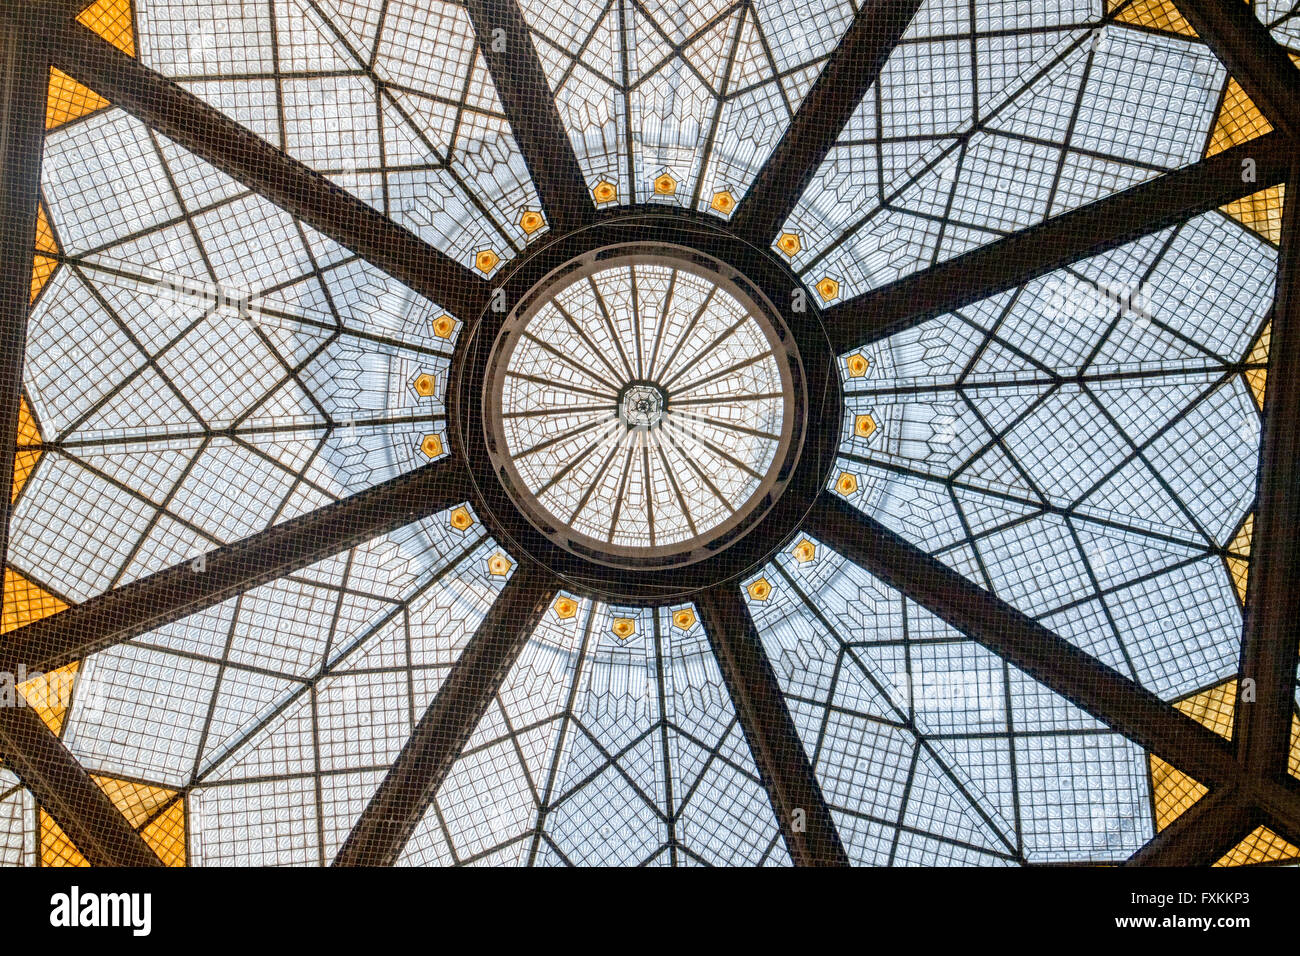 ornamented glass roof seen in Prague, the capital of the Czech Republic Stock Photo